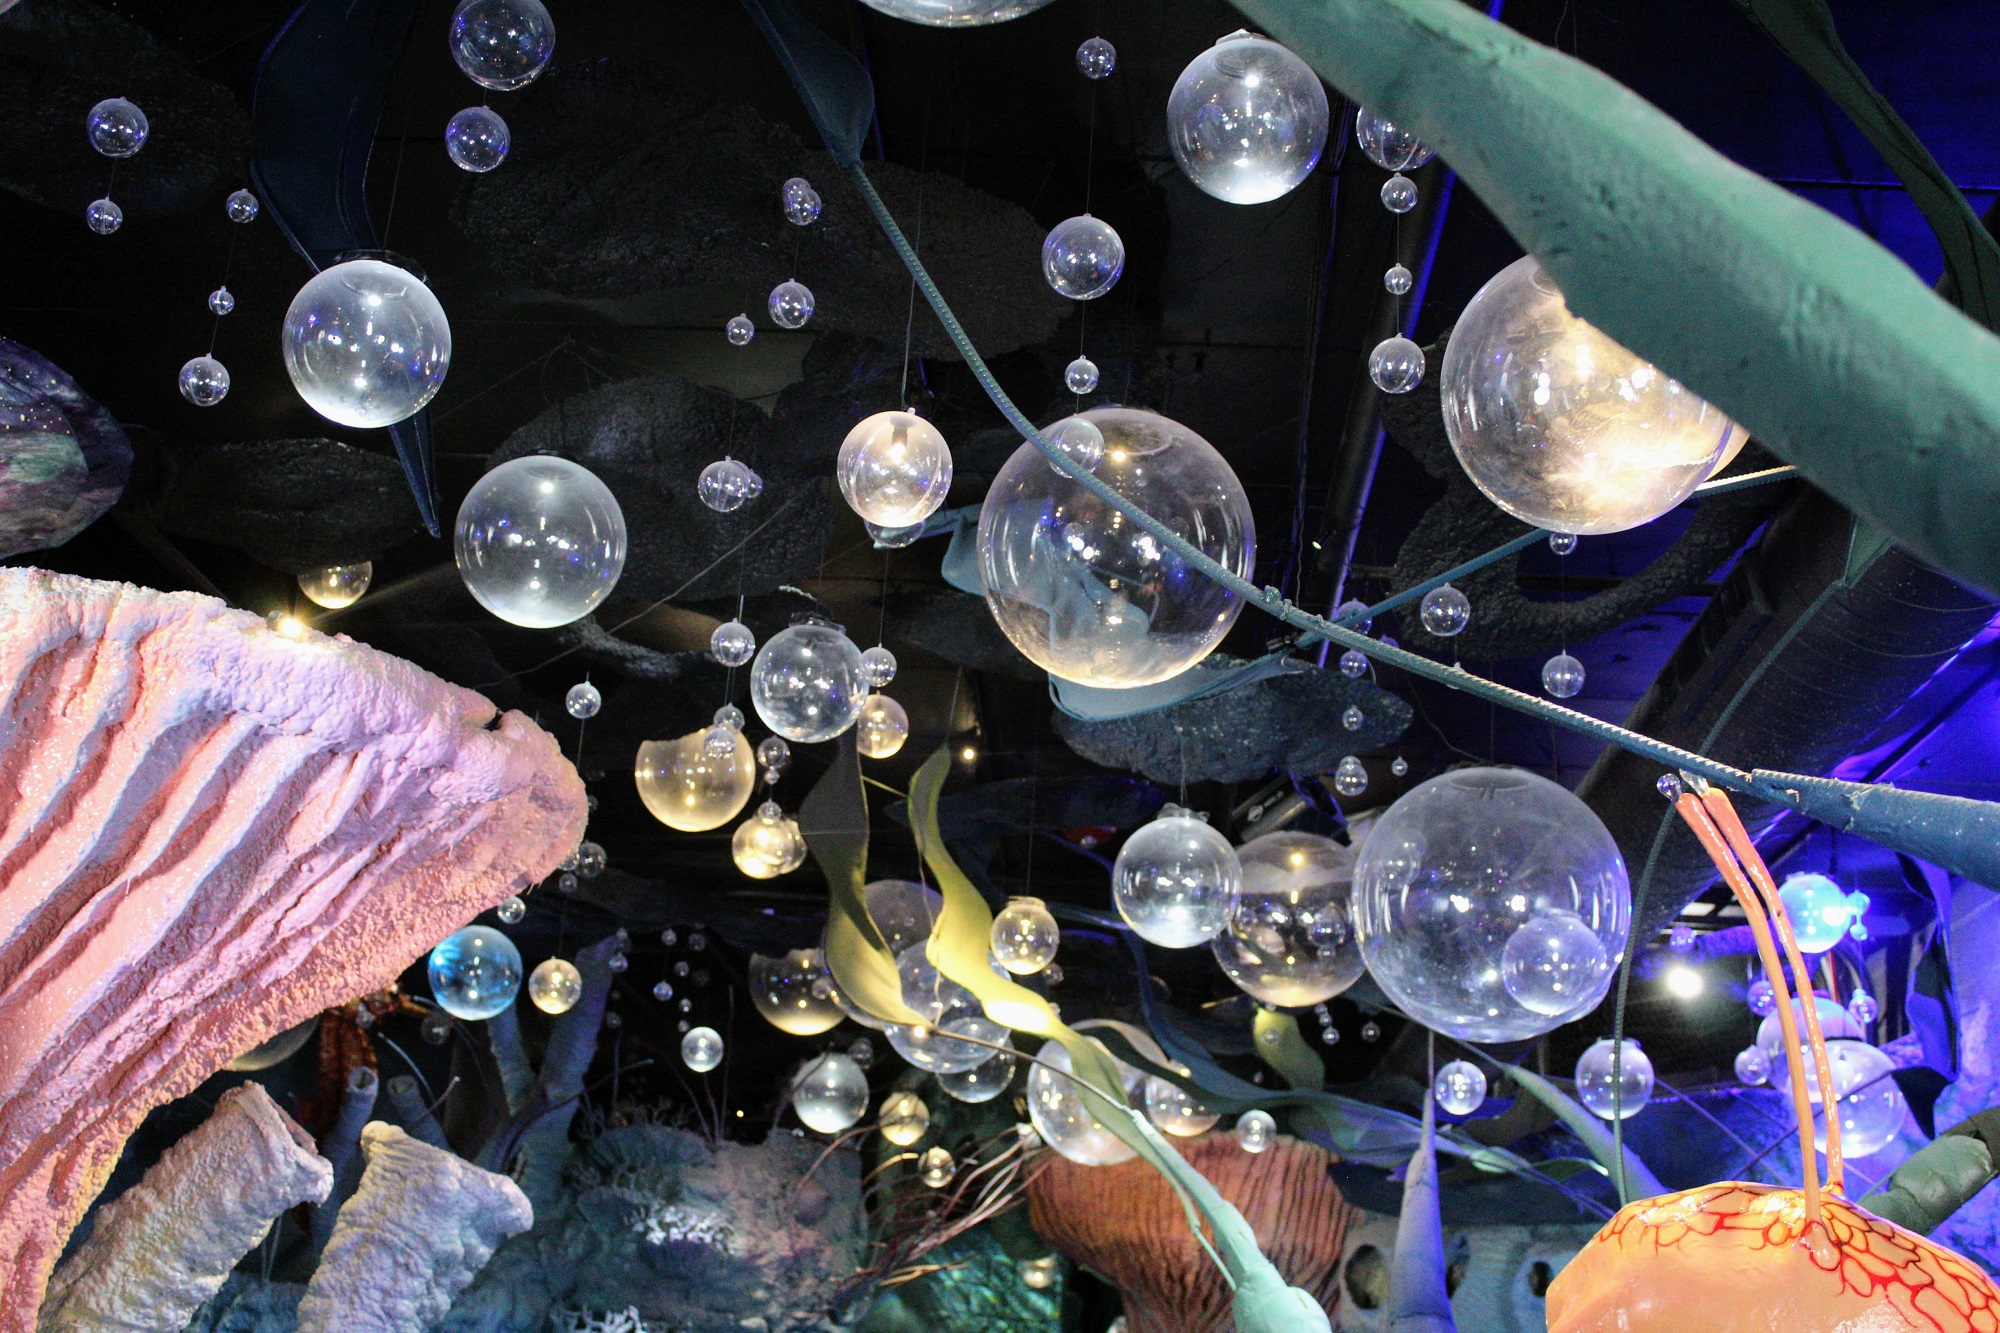 In Wizard Quest’s water realm, there are coral reefs that reach the ceilings and floating orbs that mimic bubbles. There are also koi mermaids, oversized lily pads and reflective epoxy floors. (Trina La Susa/WPR)